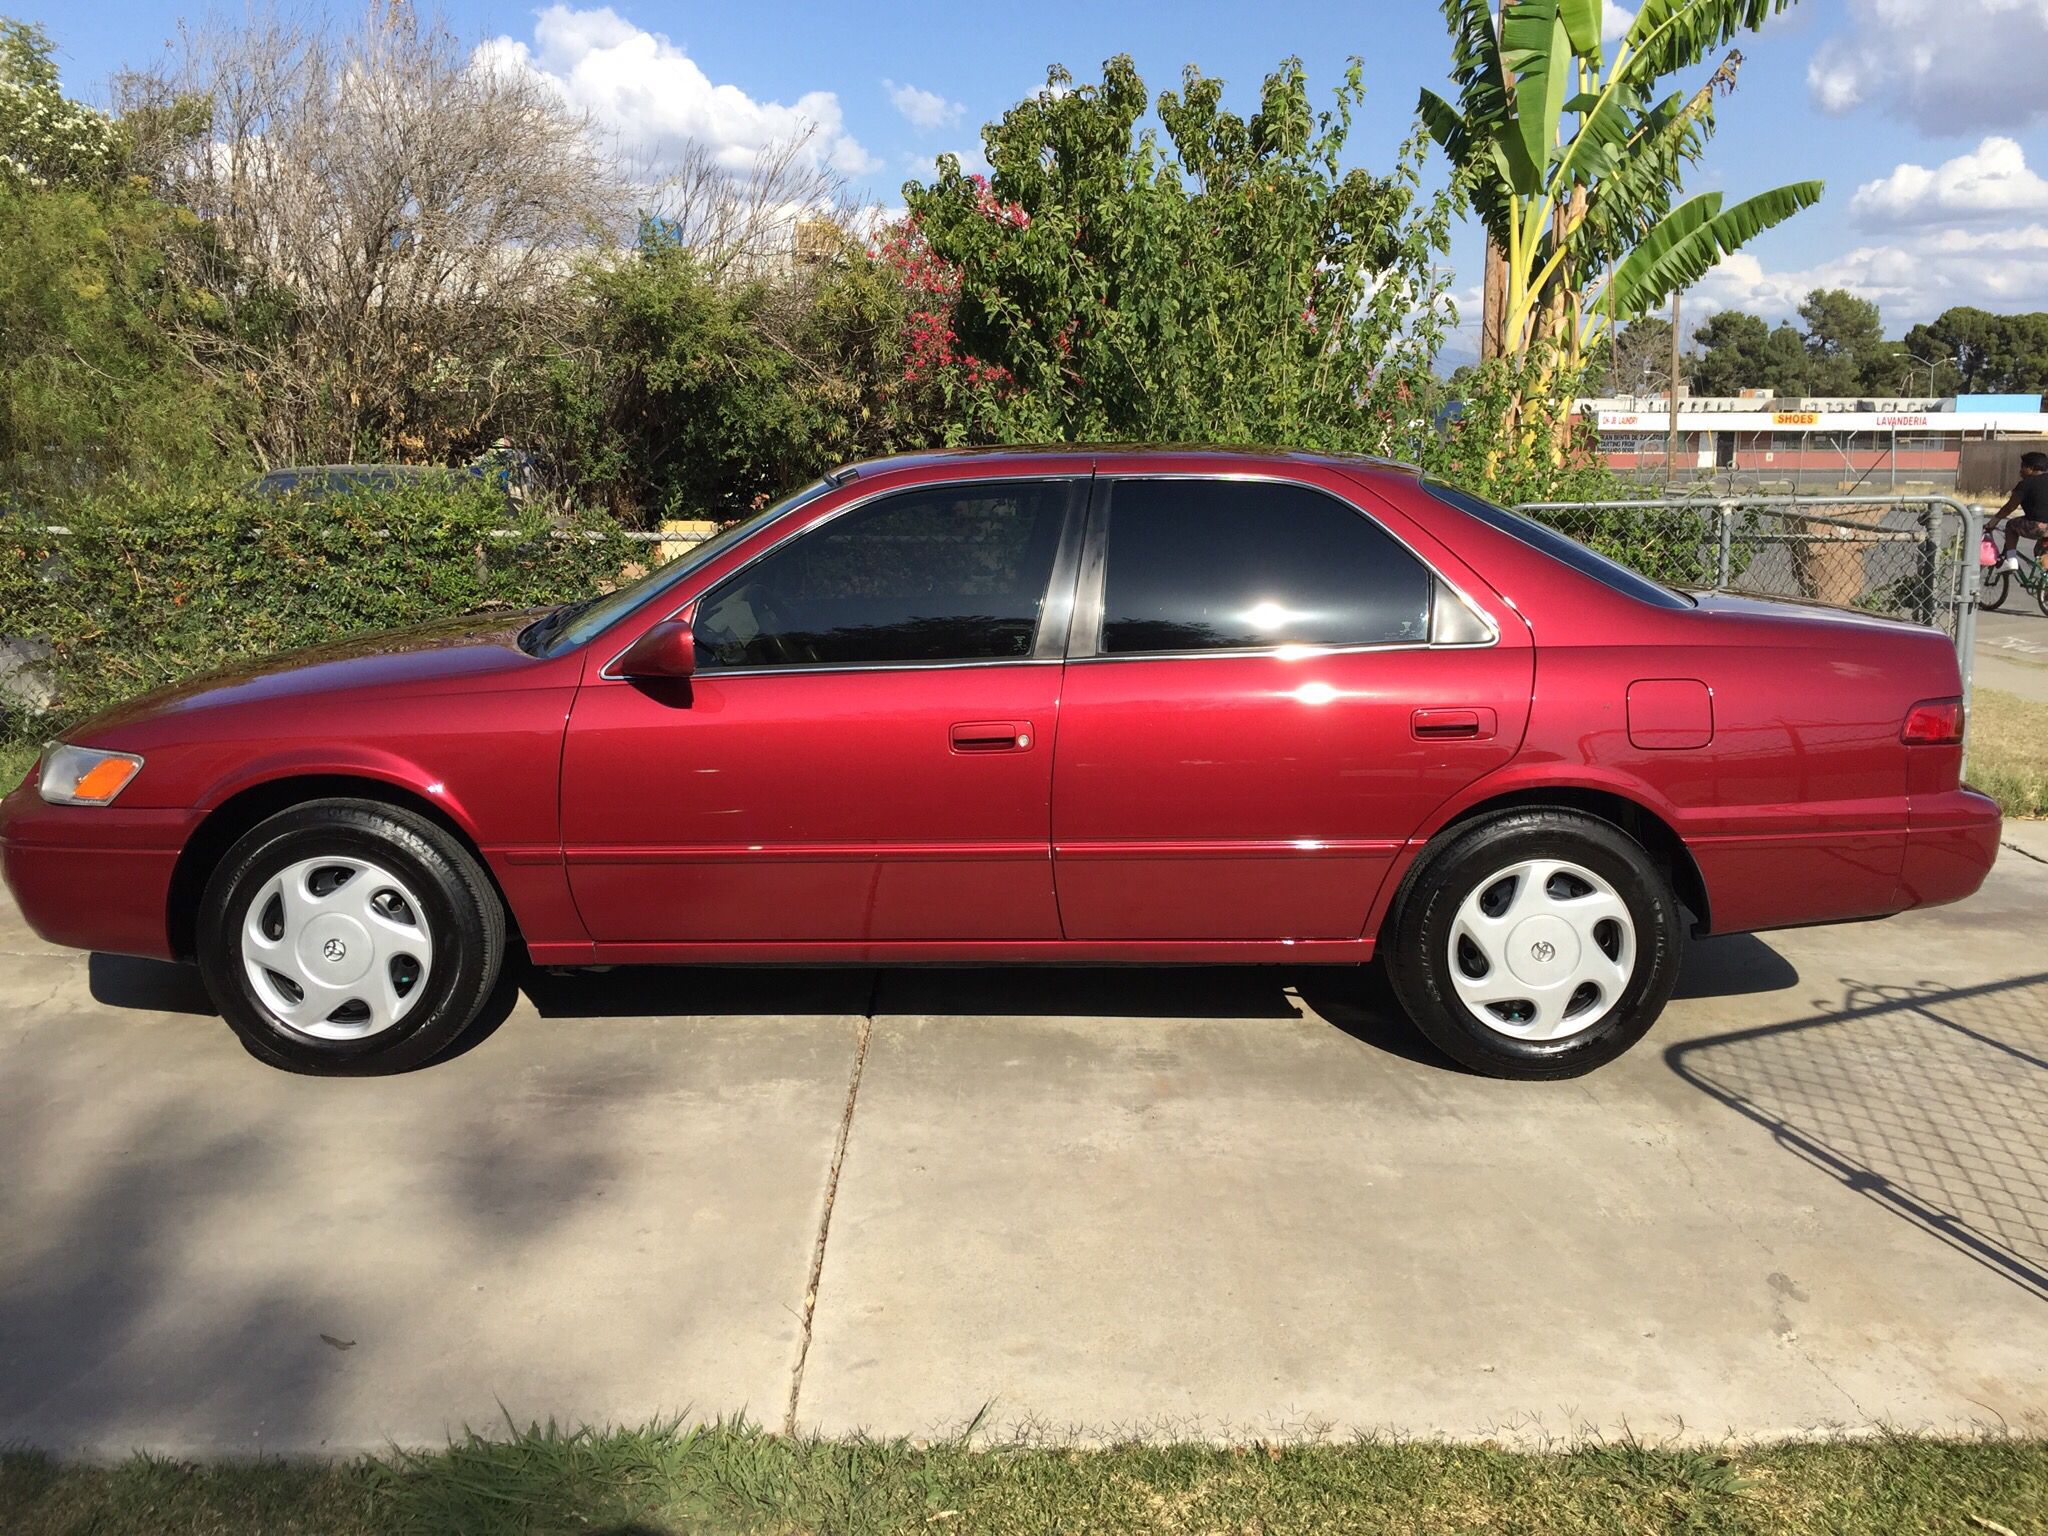 1998 Toyota Camry | Toyota camry, Car colors, Toyota